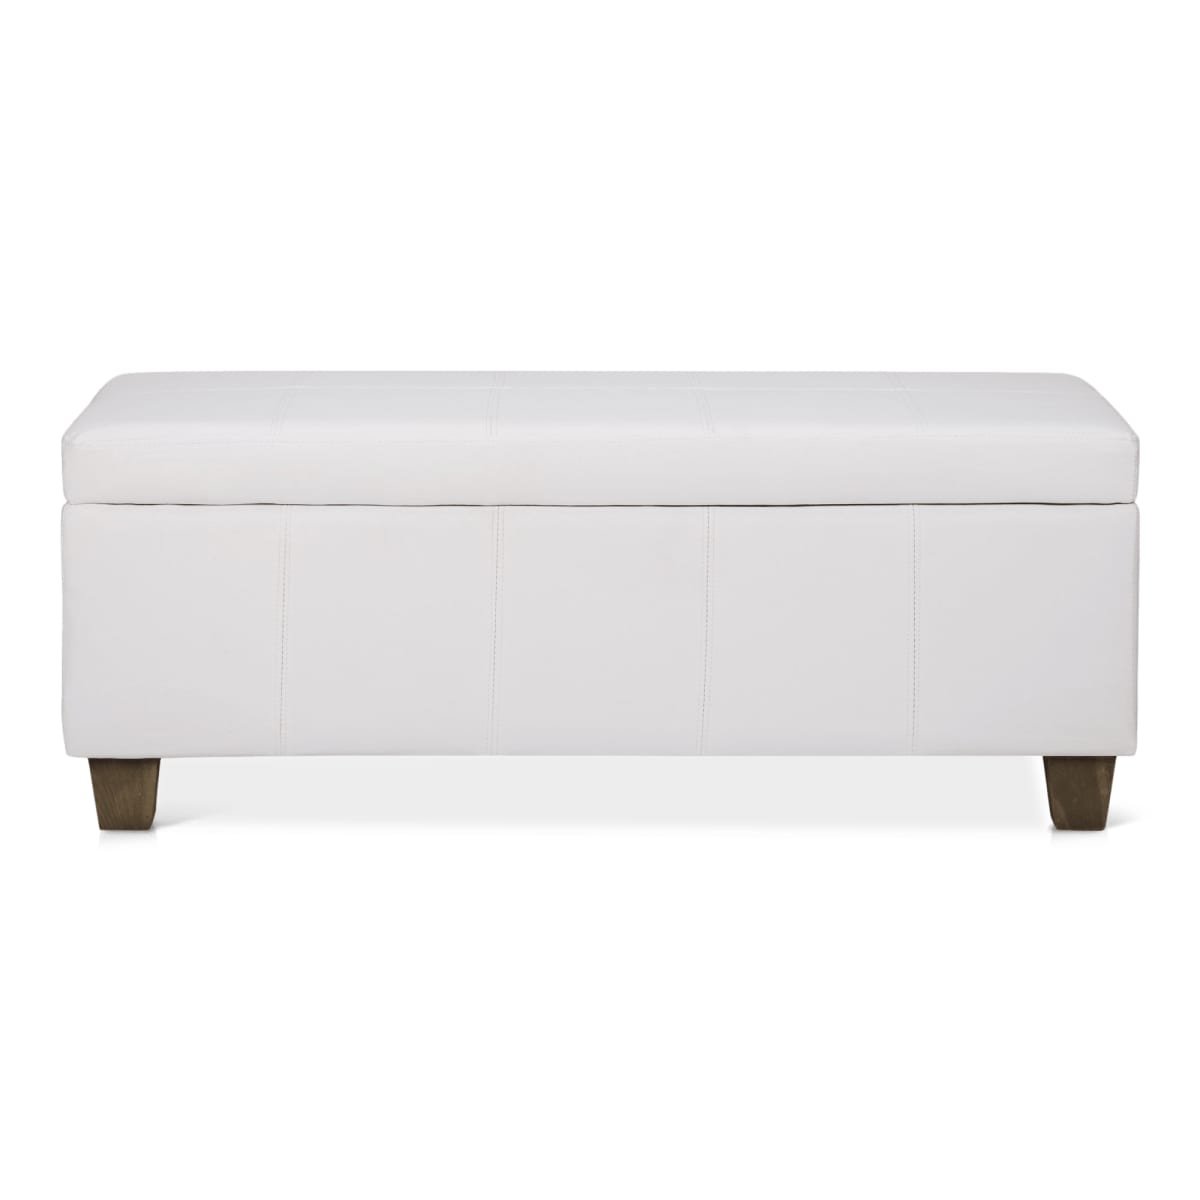 Faux Leather Storage Bench Bouclair Com, Storage Leather Bench